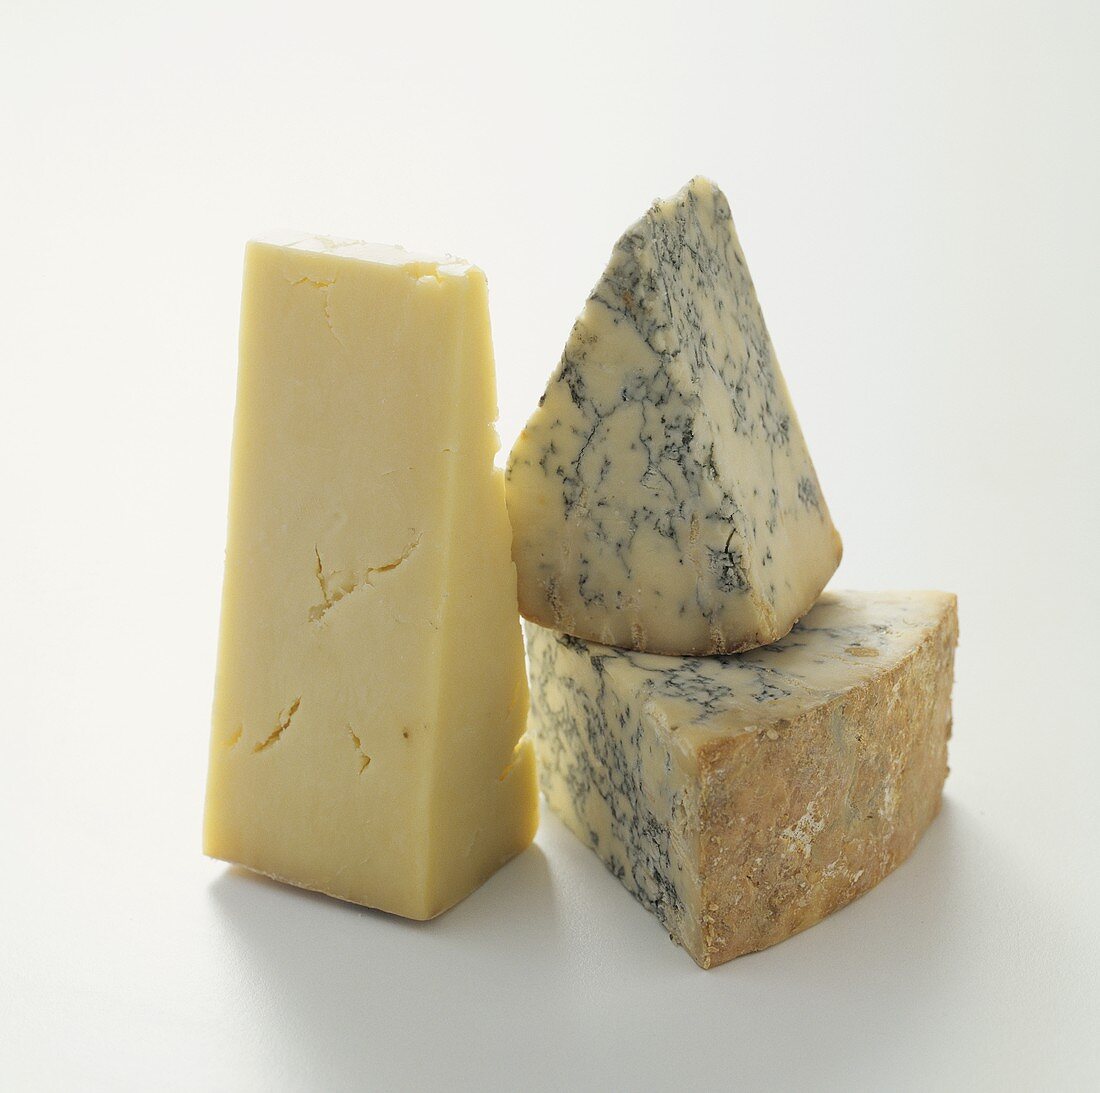 Two pieces of Stilton and one piece of Cheddar